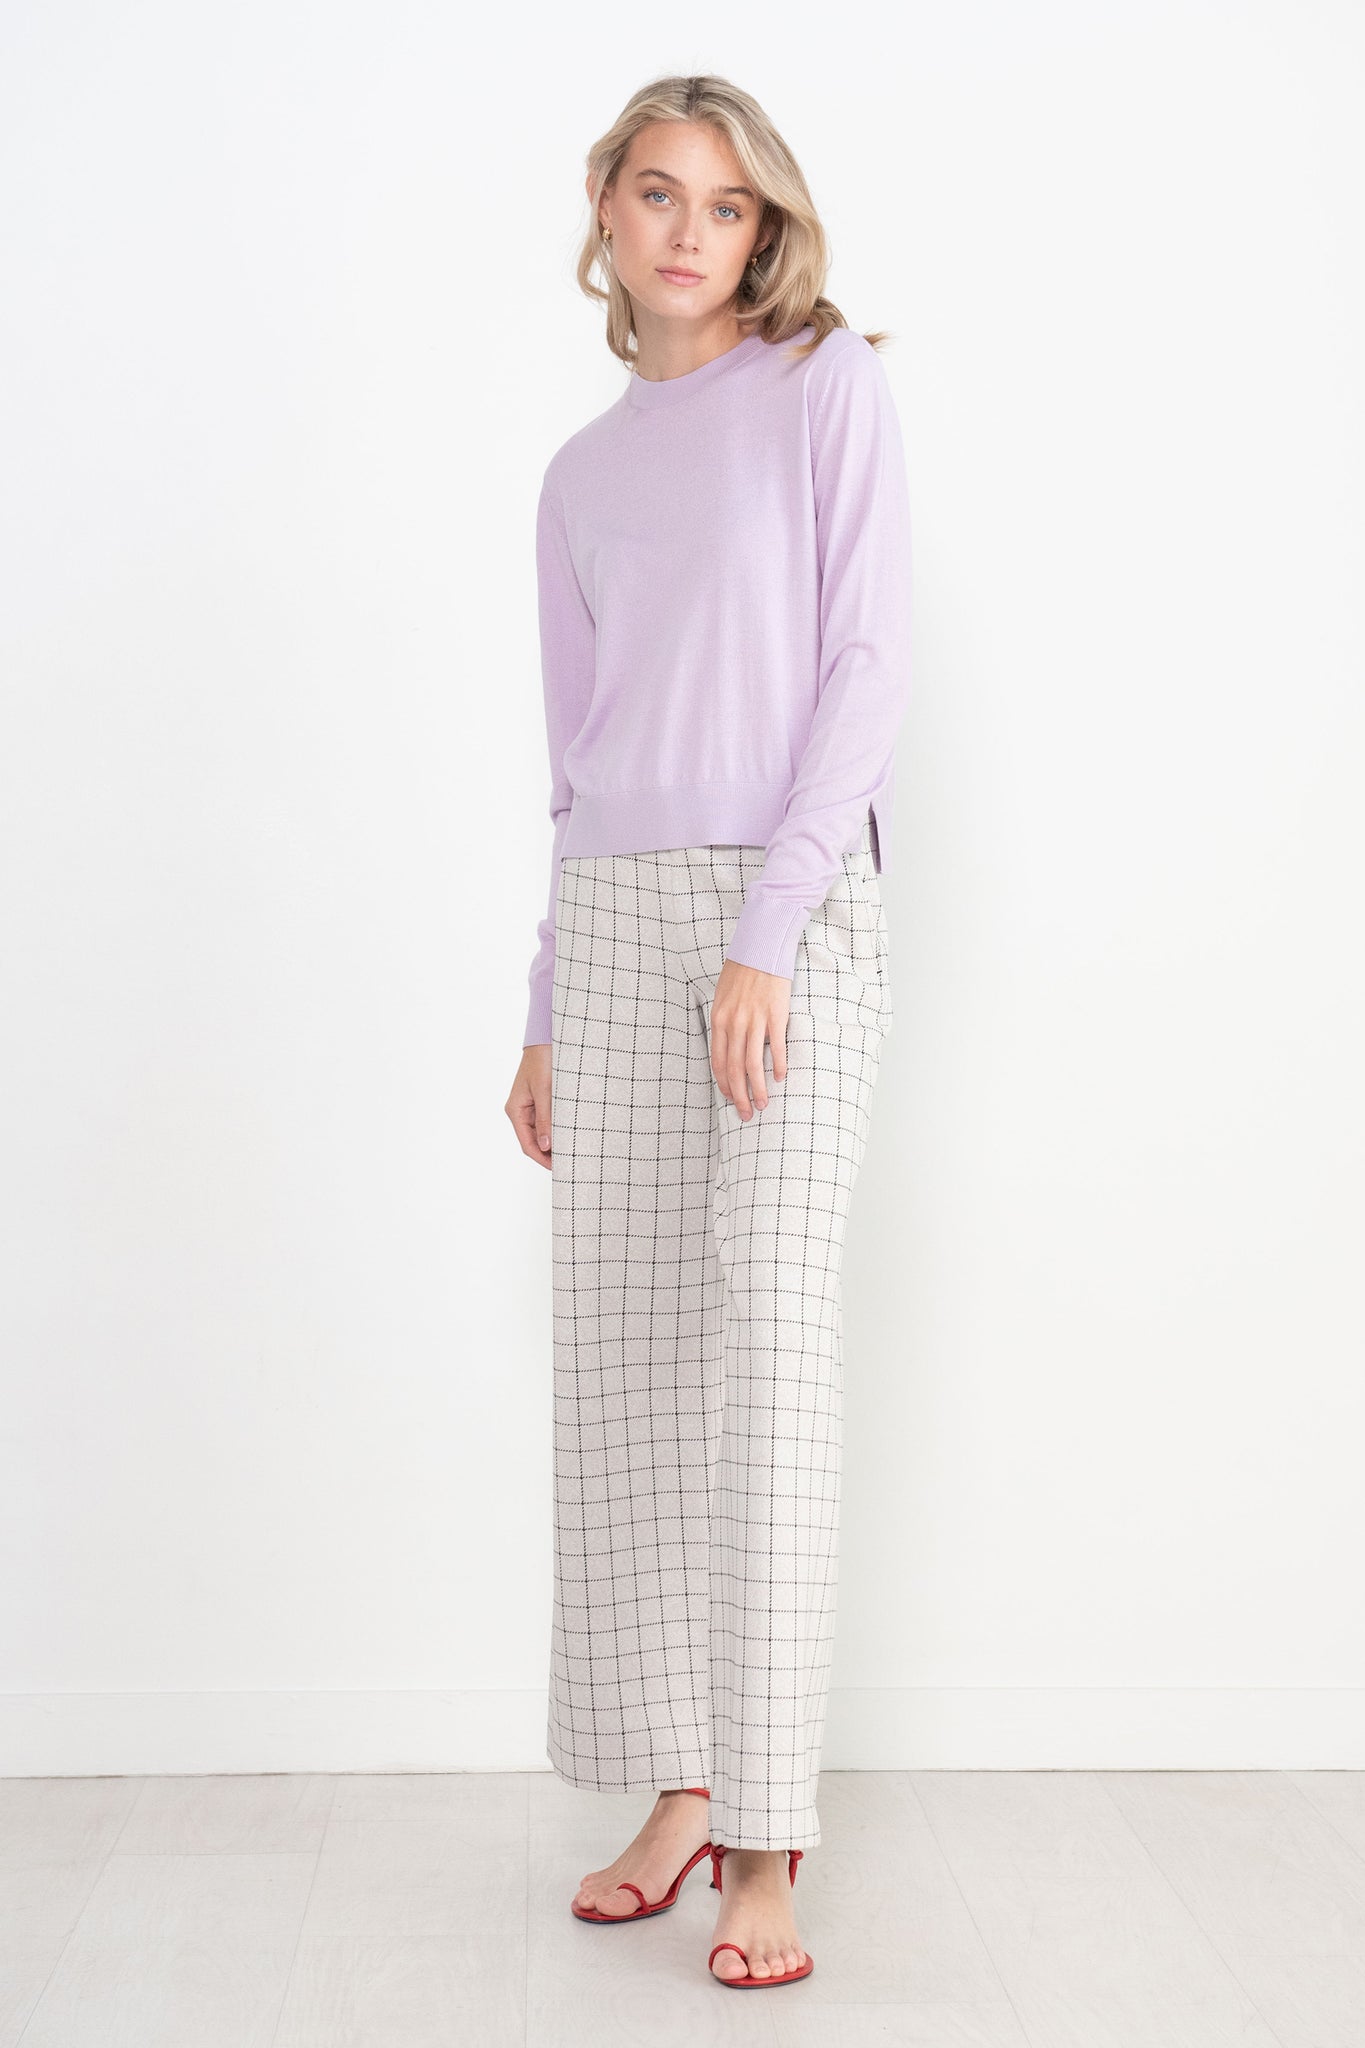 ROSETTA GETTY - Relaxed Crewneck Sweater, Lilac